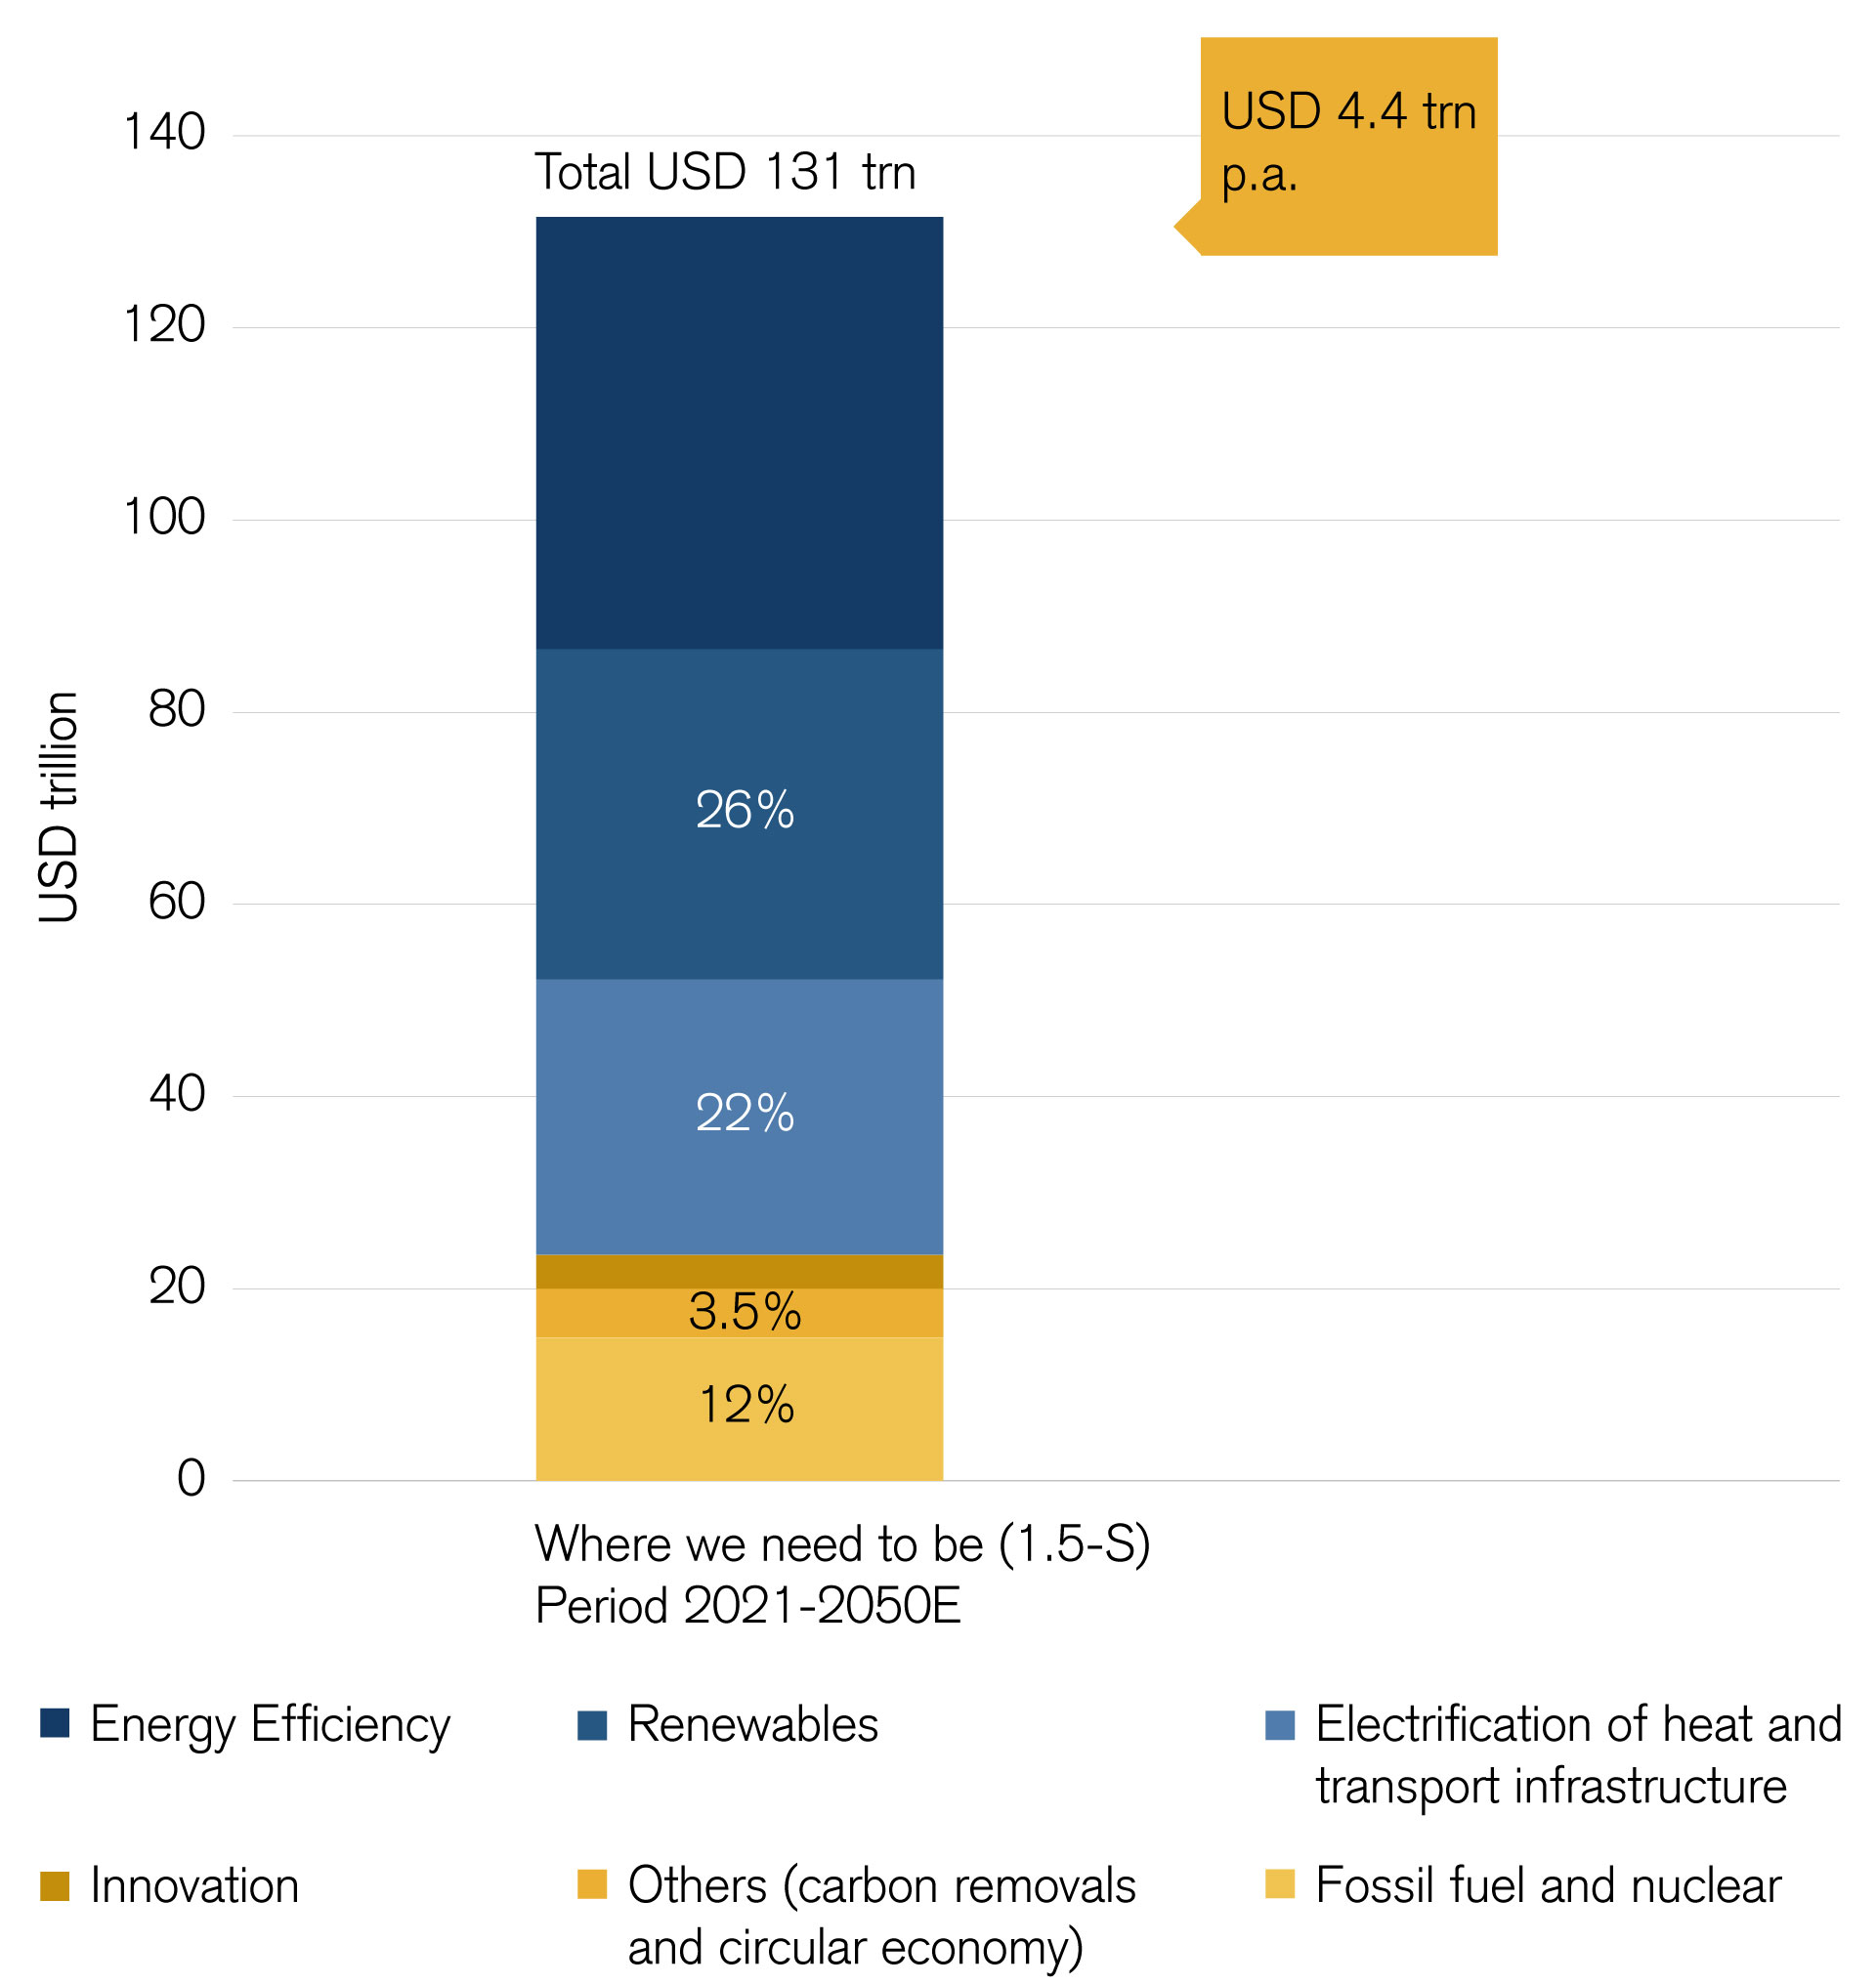 Vertical bar chart showing spending on infrastructure needed to reach climate goals.